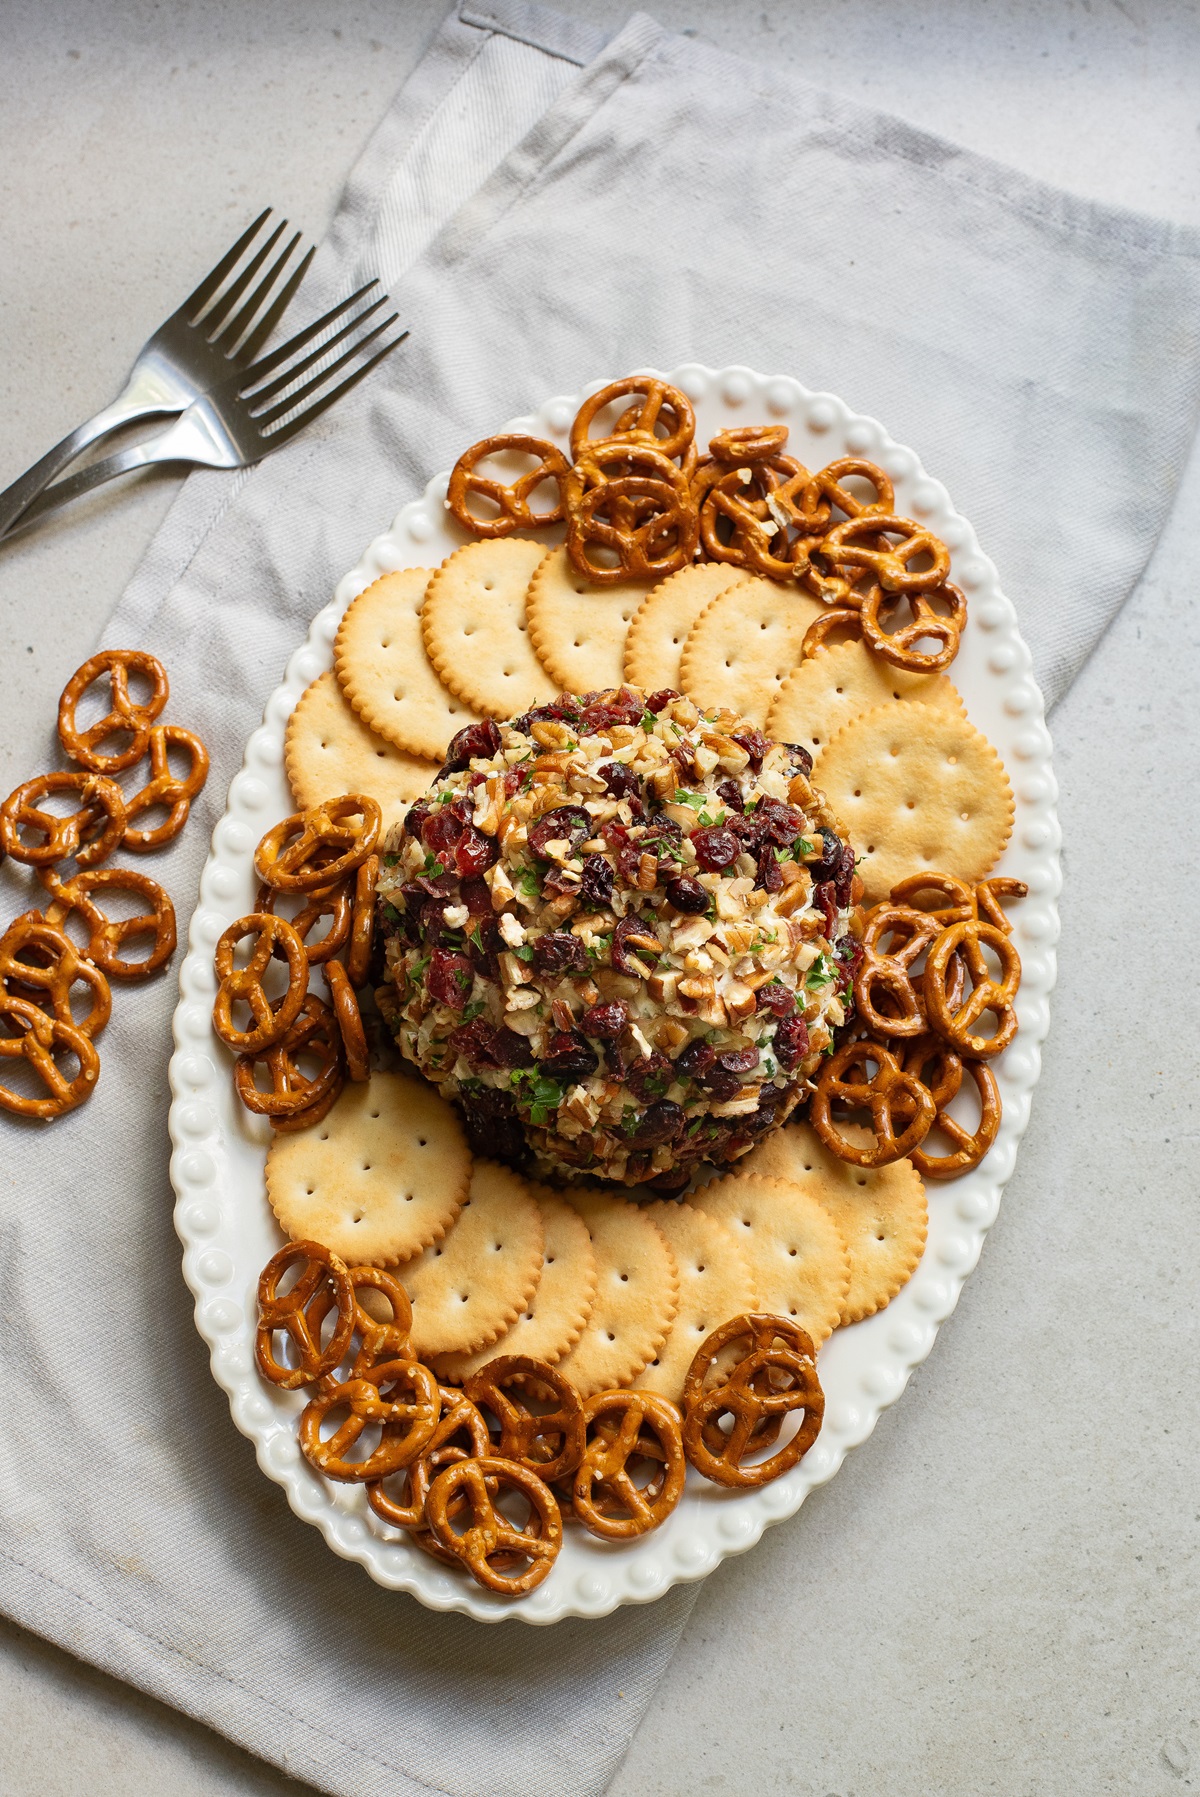 Platter with biscuits, pretzels and cheese.